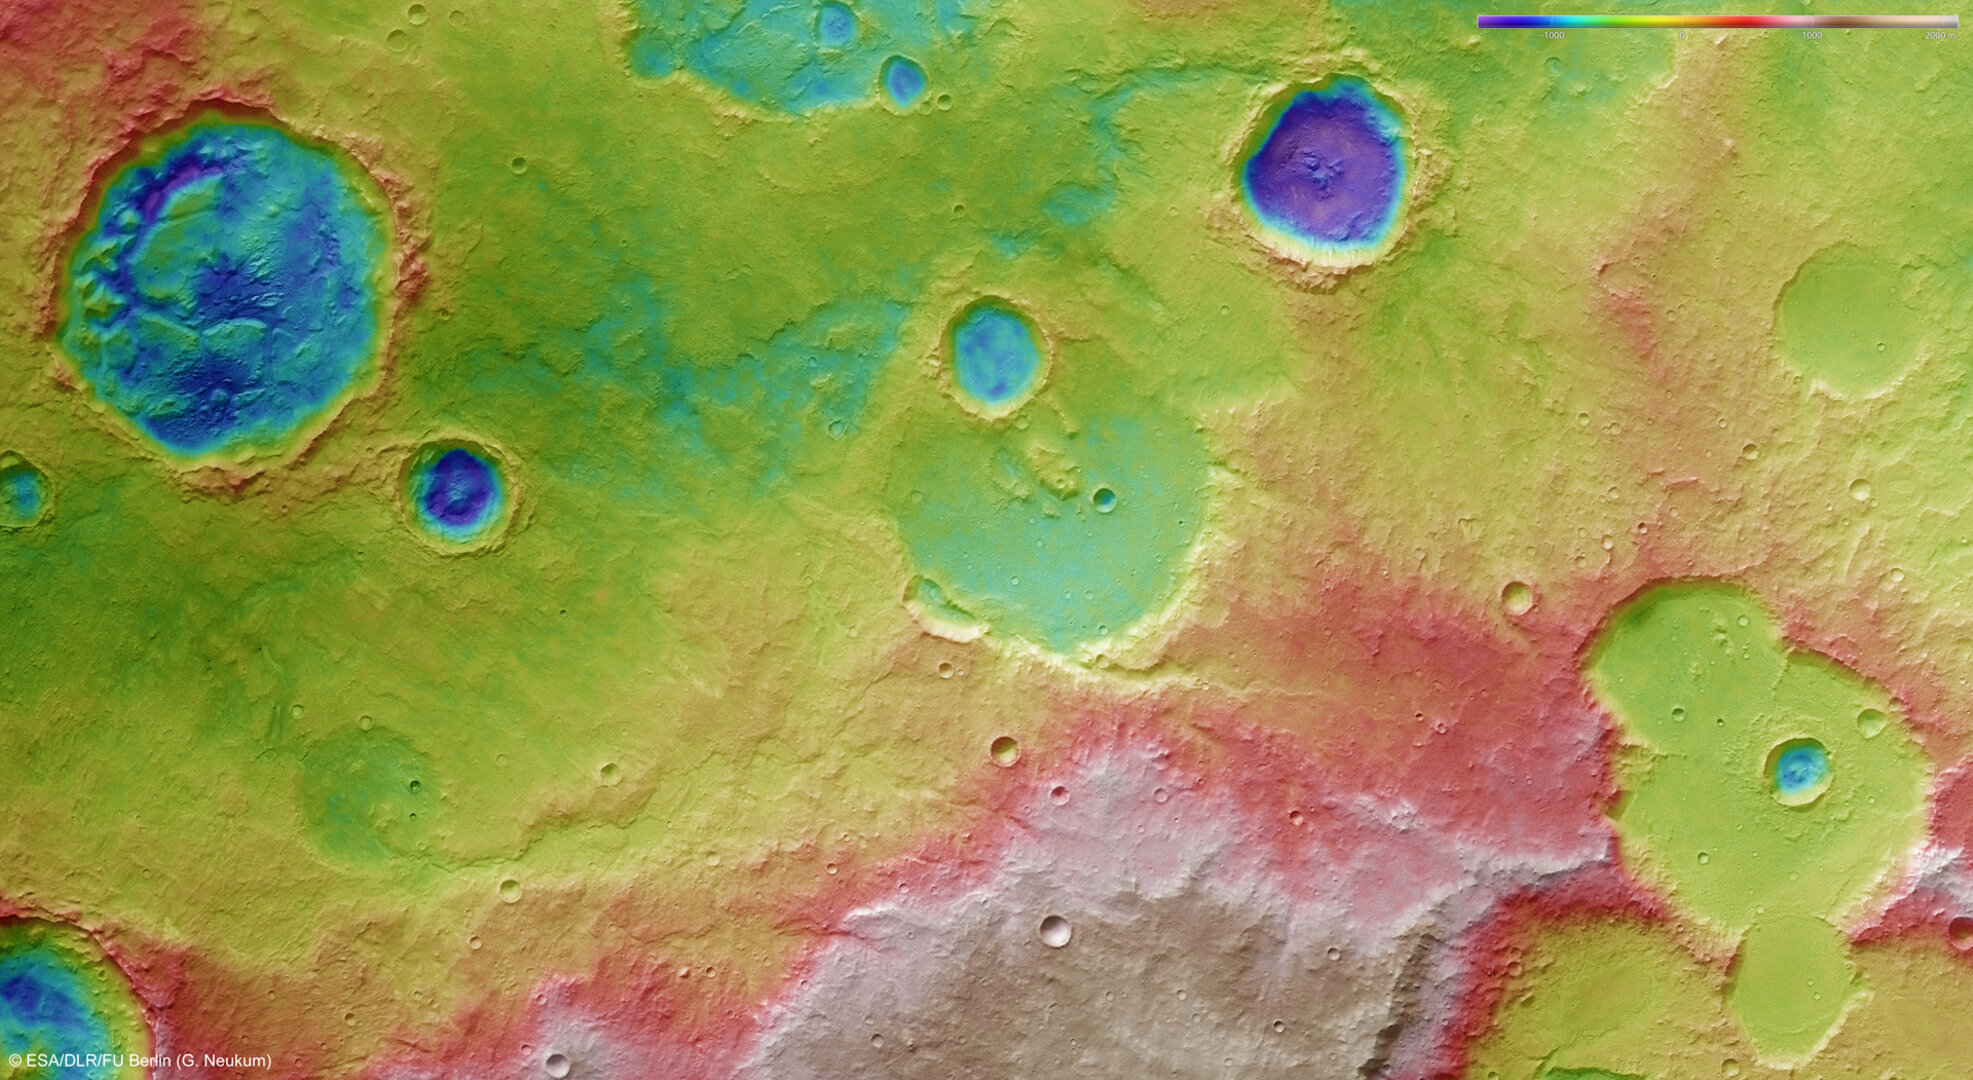 Colour-coded topography of Tagus Valles region